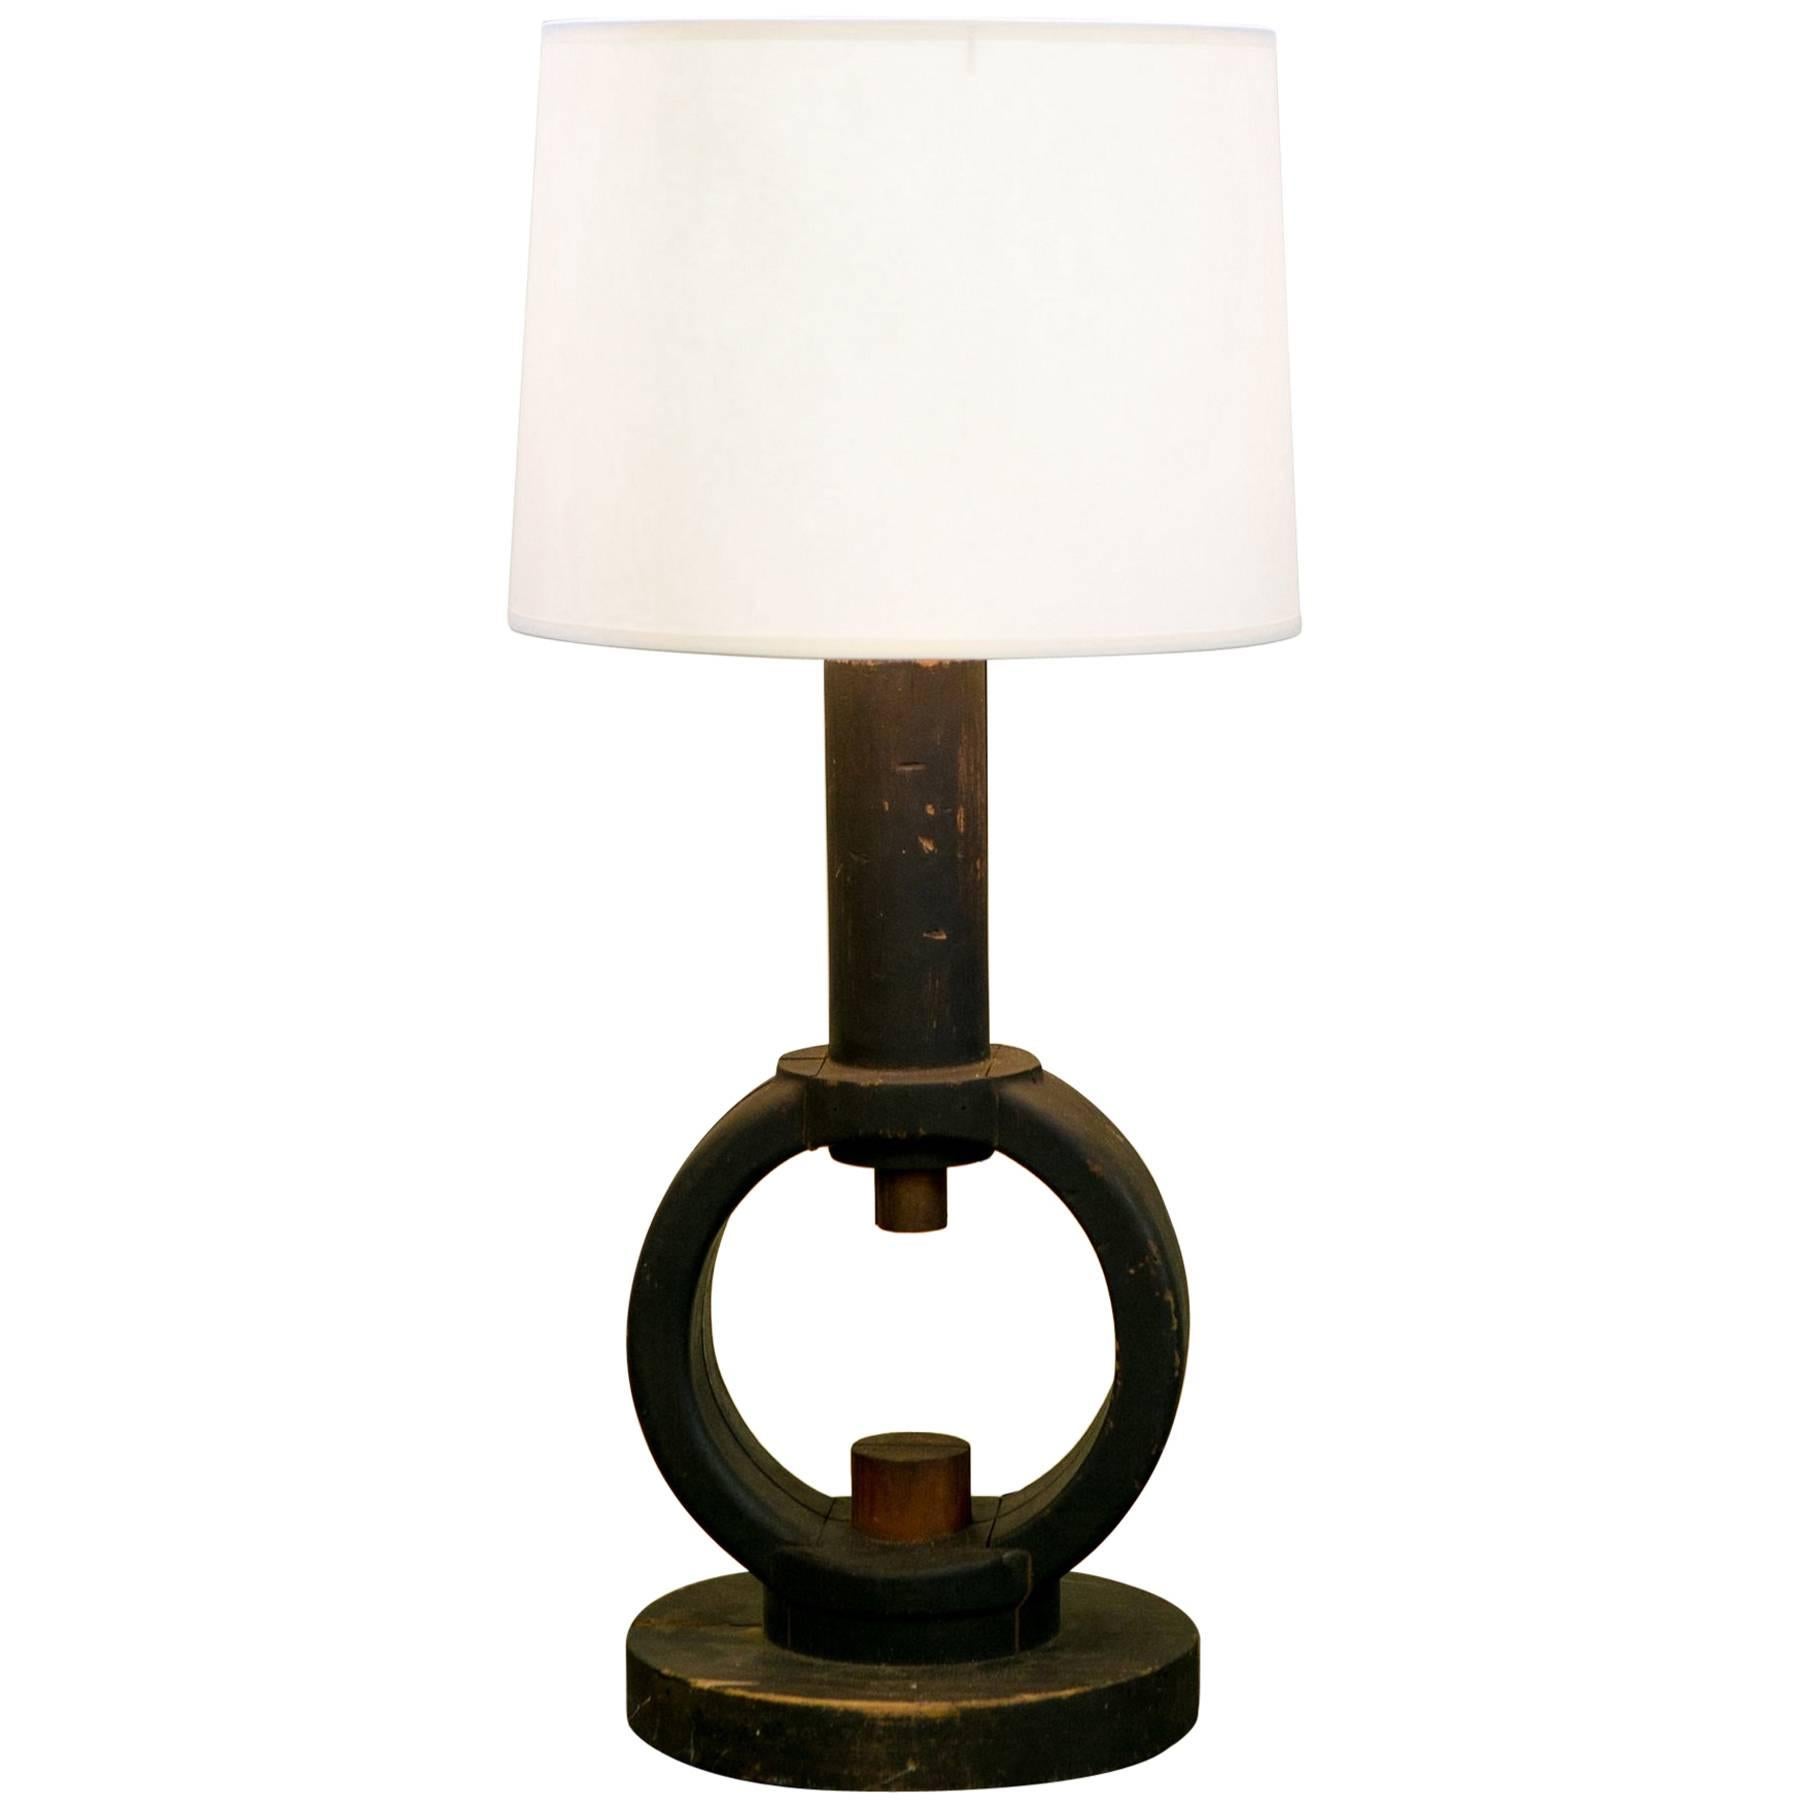 One of a Kind Black Wooden Table Lamp with Shade